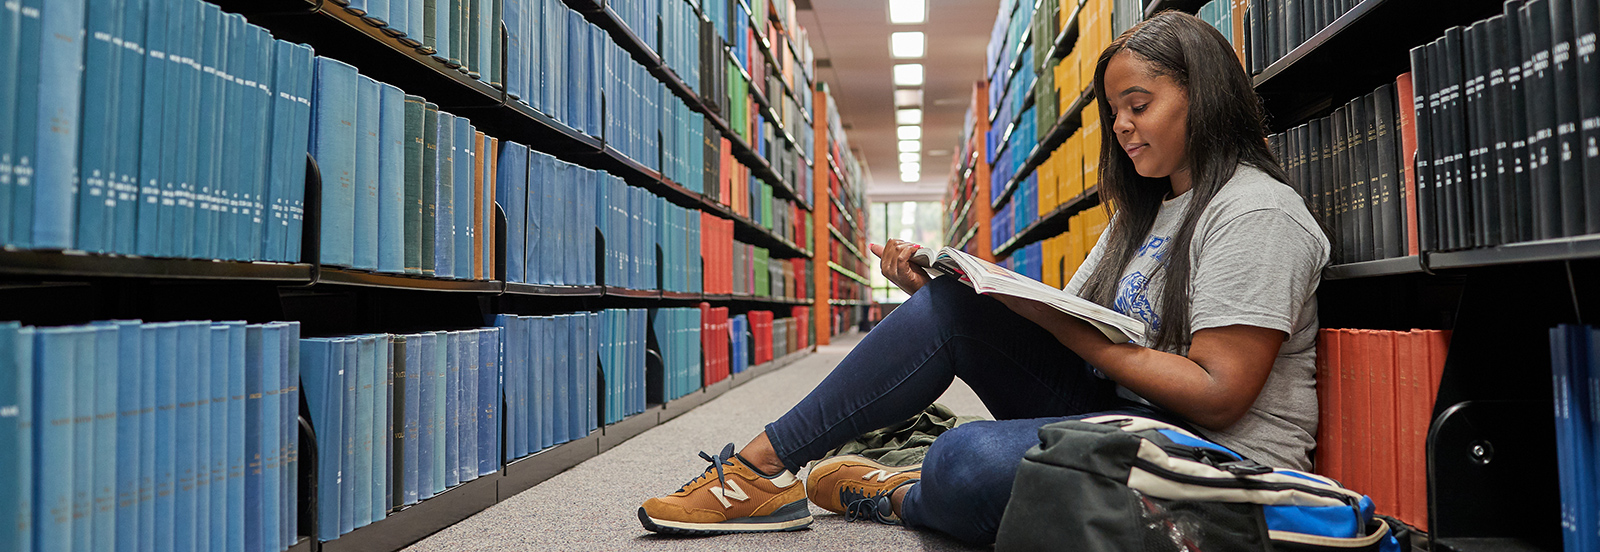 student sitting in floor of library with book shelves behind her, reading a book